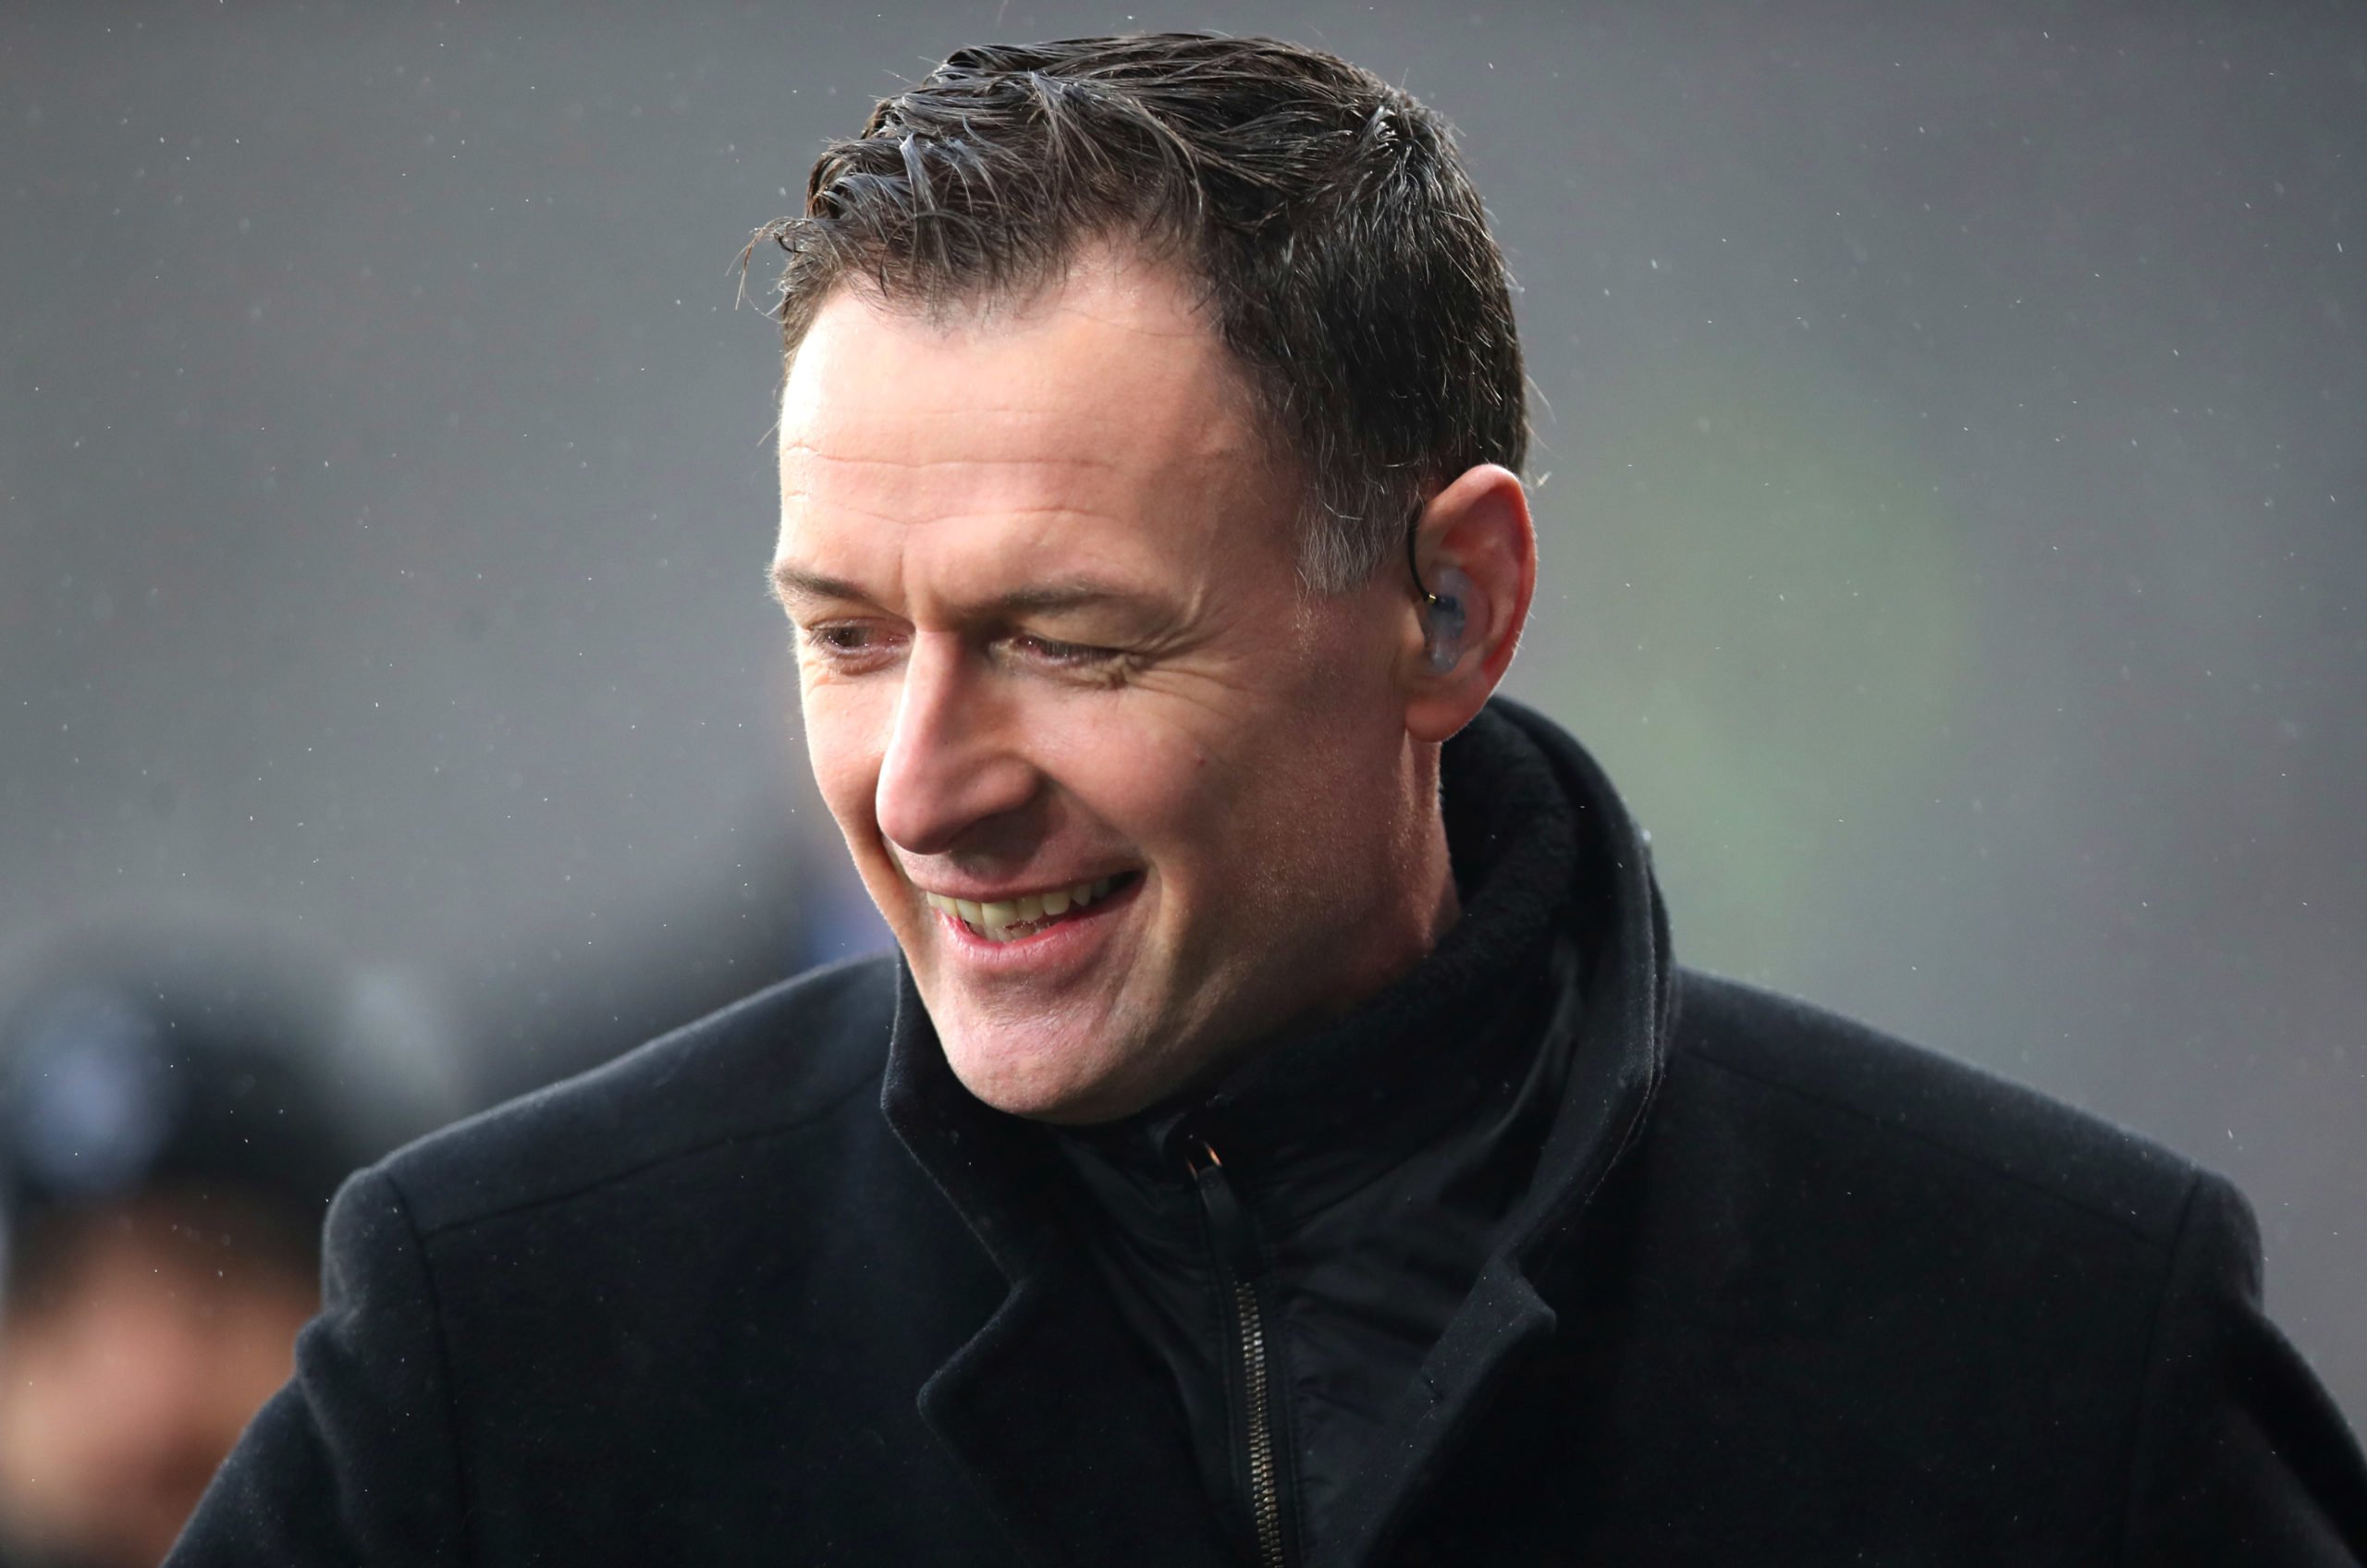 Celtic are ill-prepared for the new season but Chris Sutton's doomsday scenarios help nobody